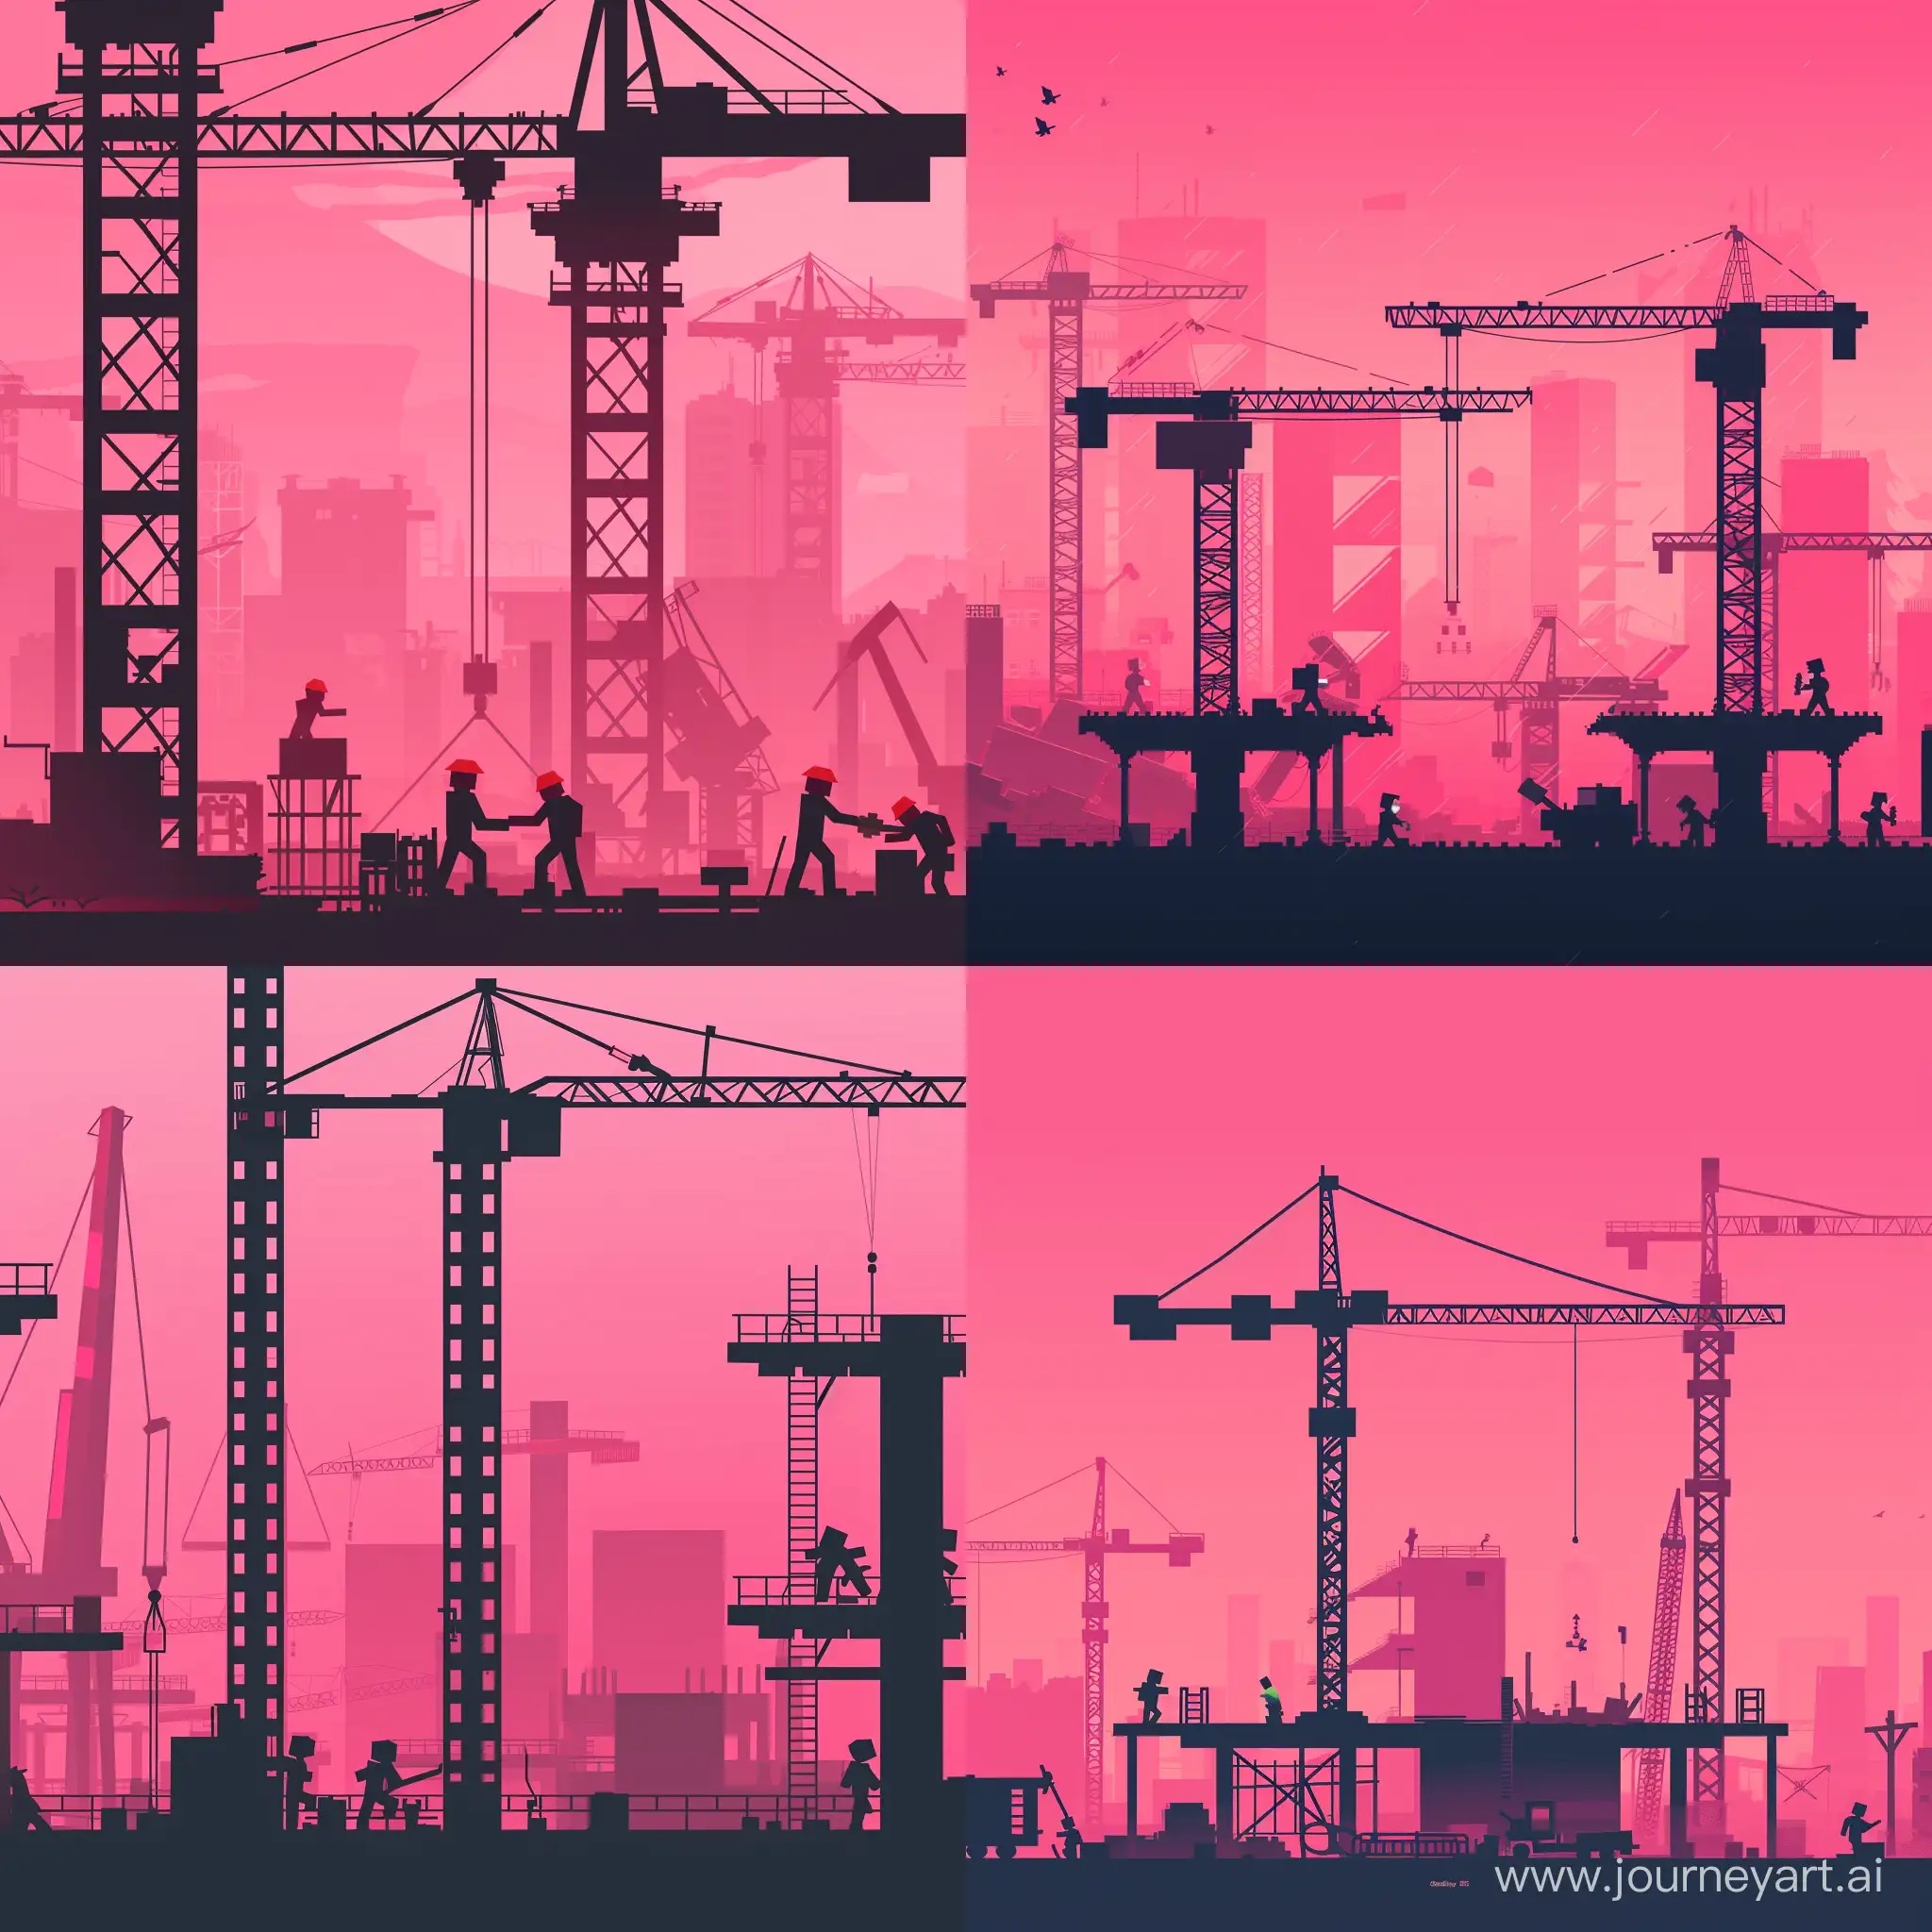 Minecraft-Logo-Construction-Site-with-Black-Cranes-and-Pink-Gradient-Background